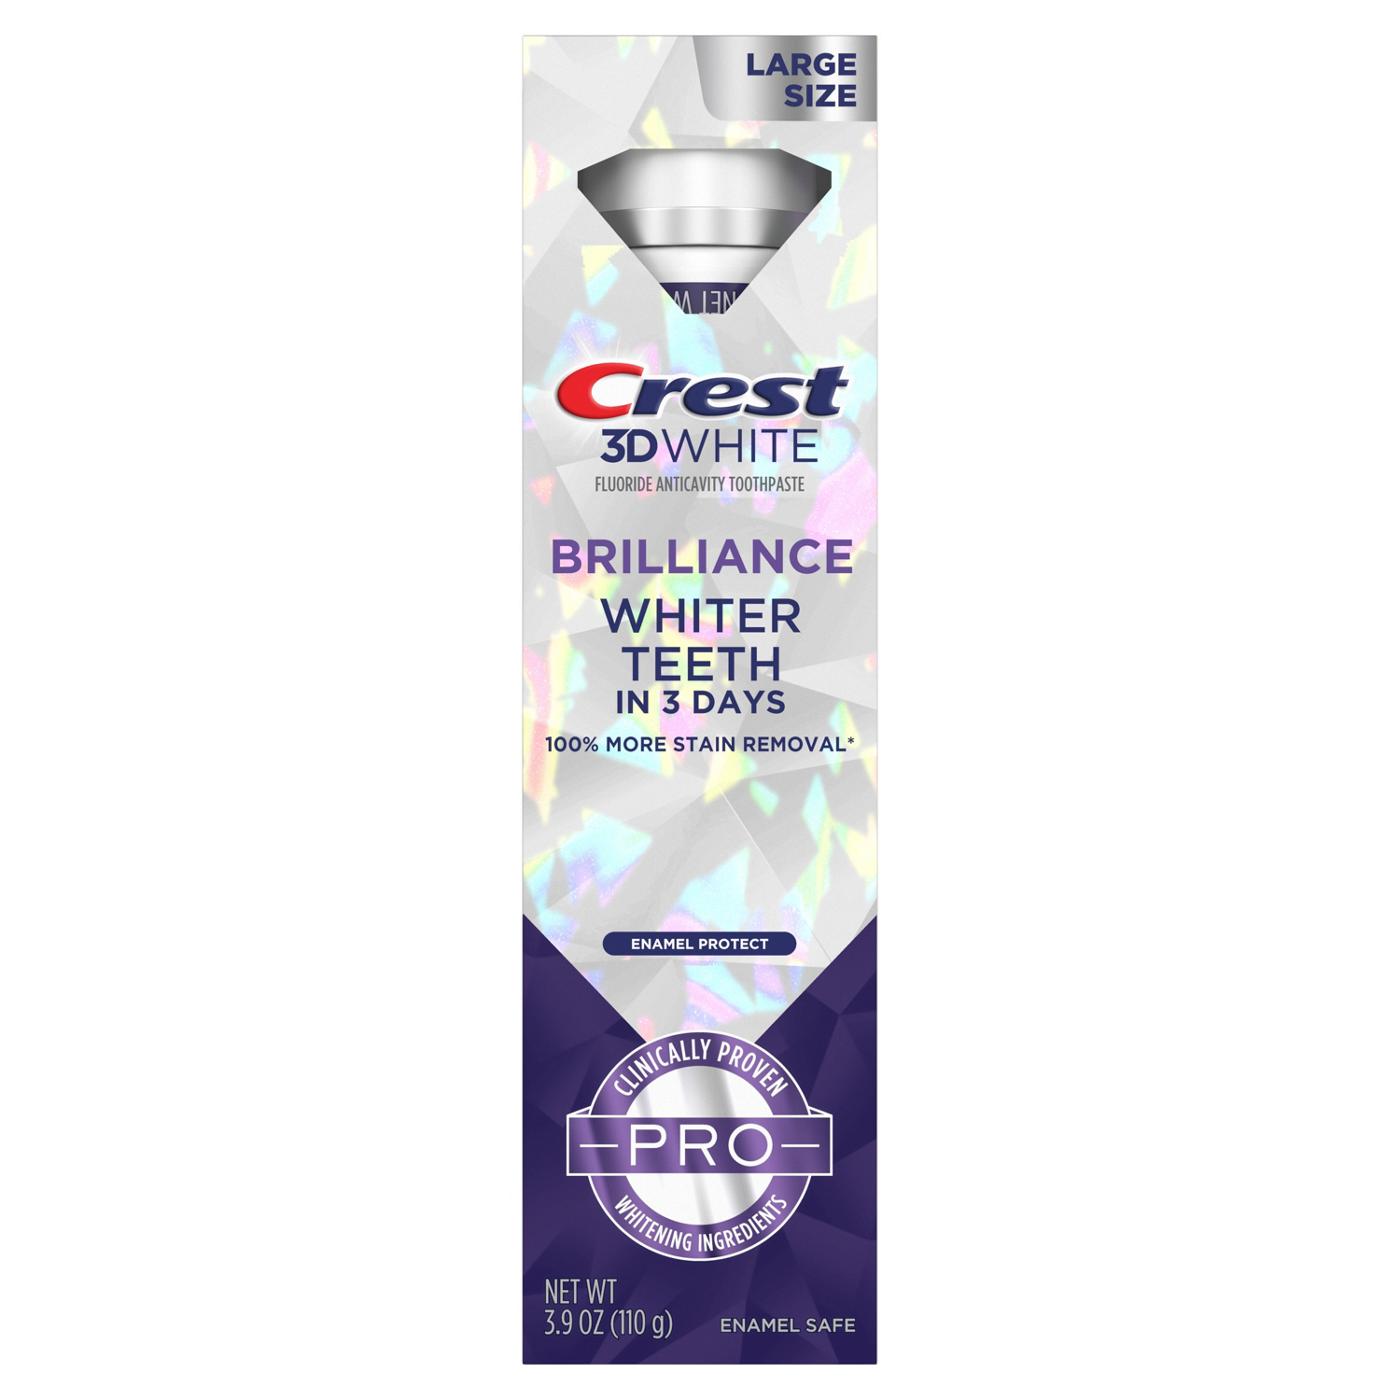 Crest 3D White Brilliance Toothpaste - Enamel Protect; image 3 of 8